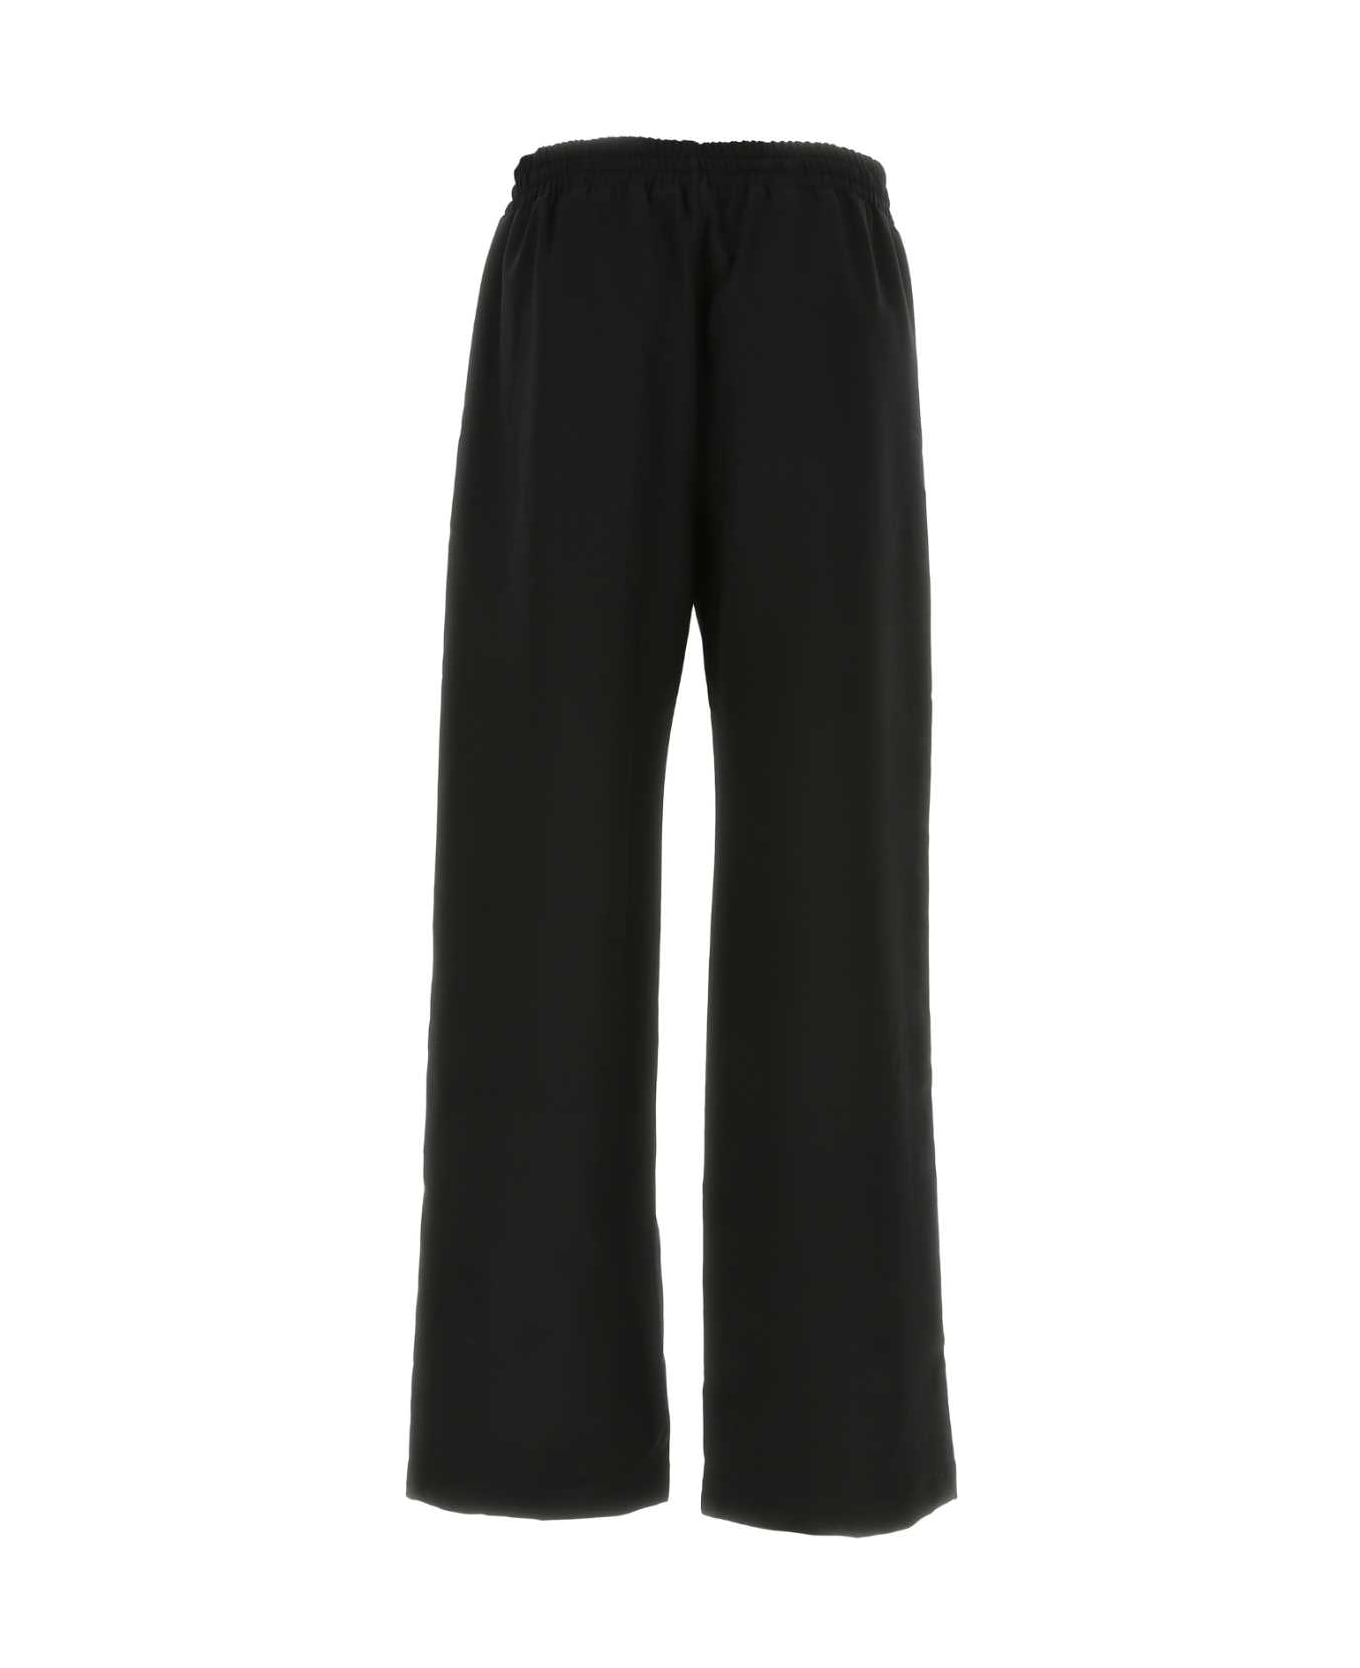 Off-White Black Wool Blend Joggers - 1010 ボトムス